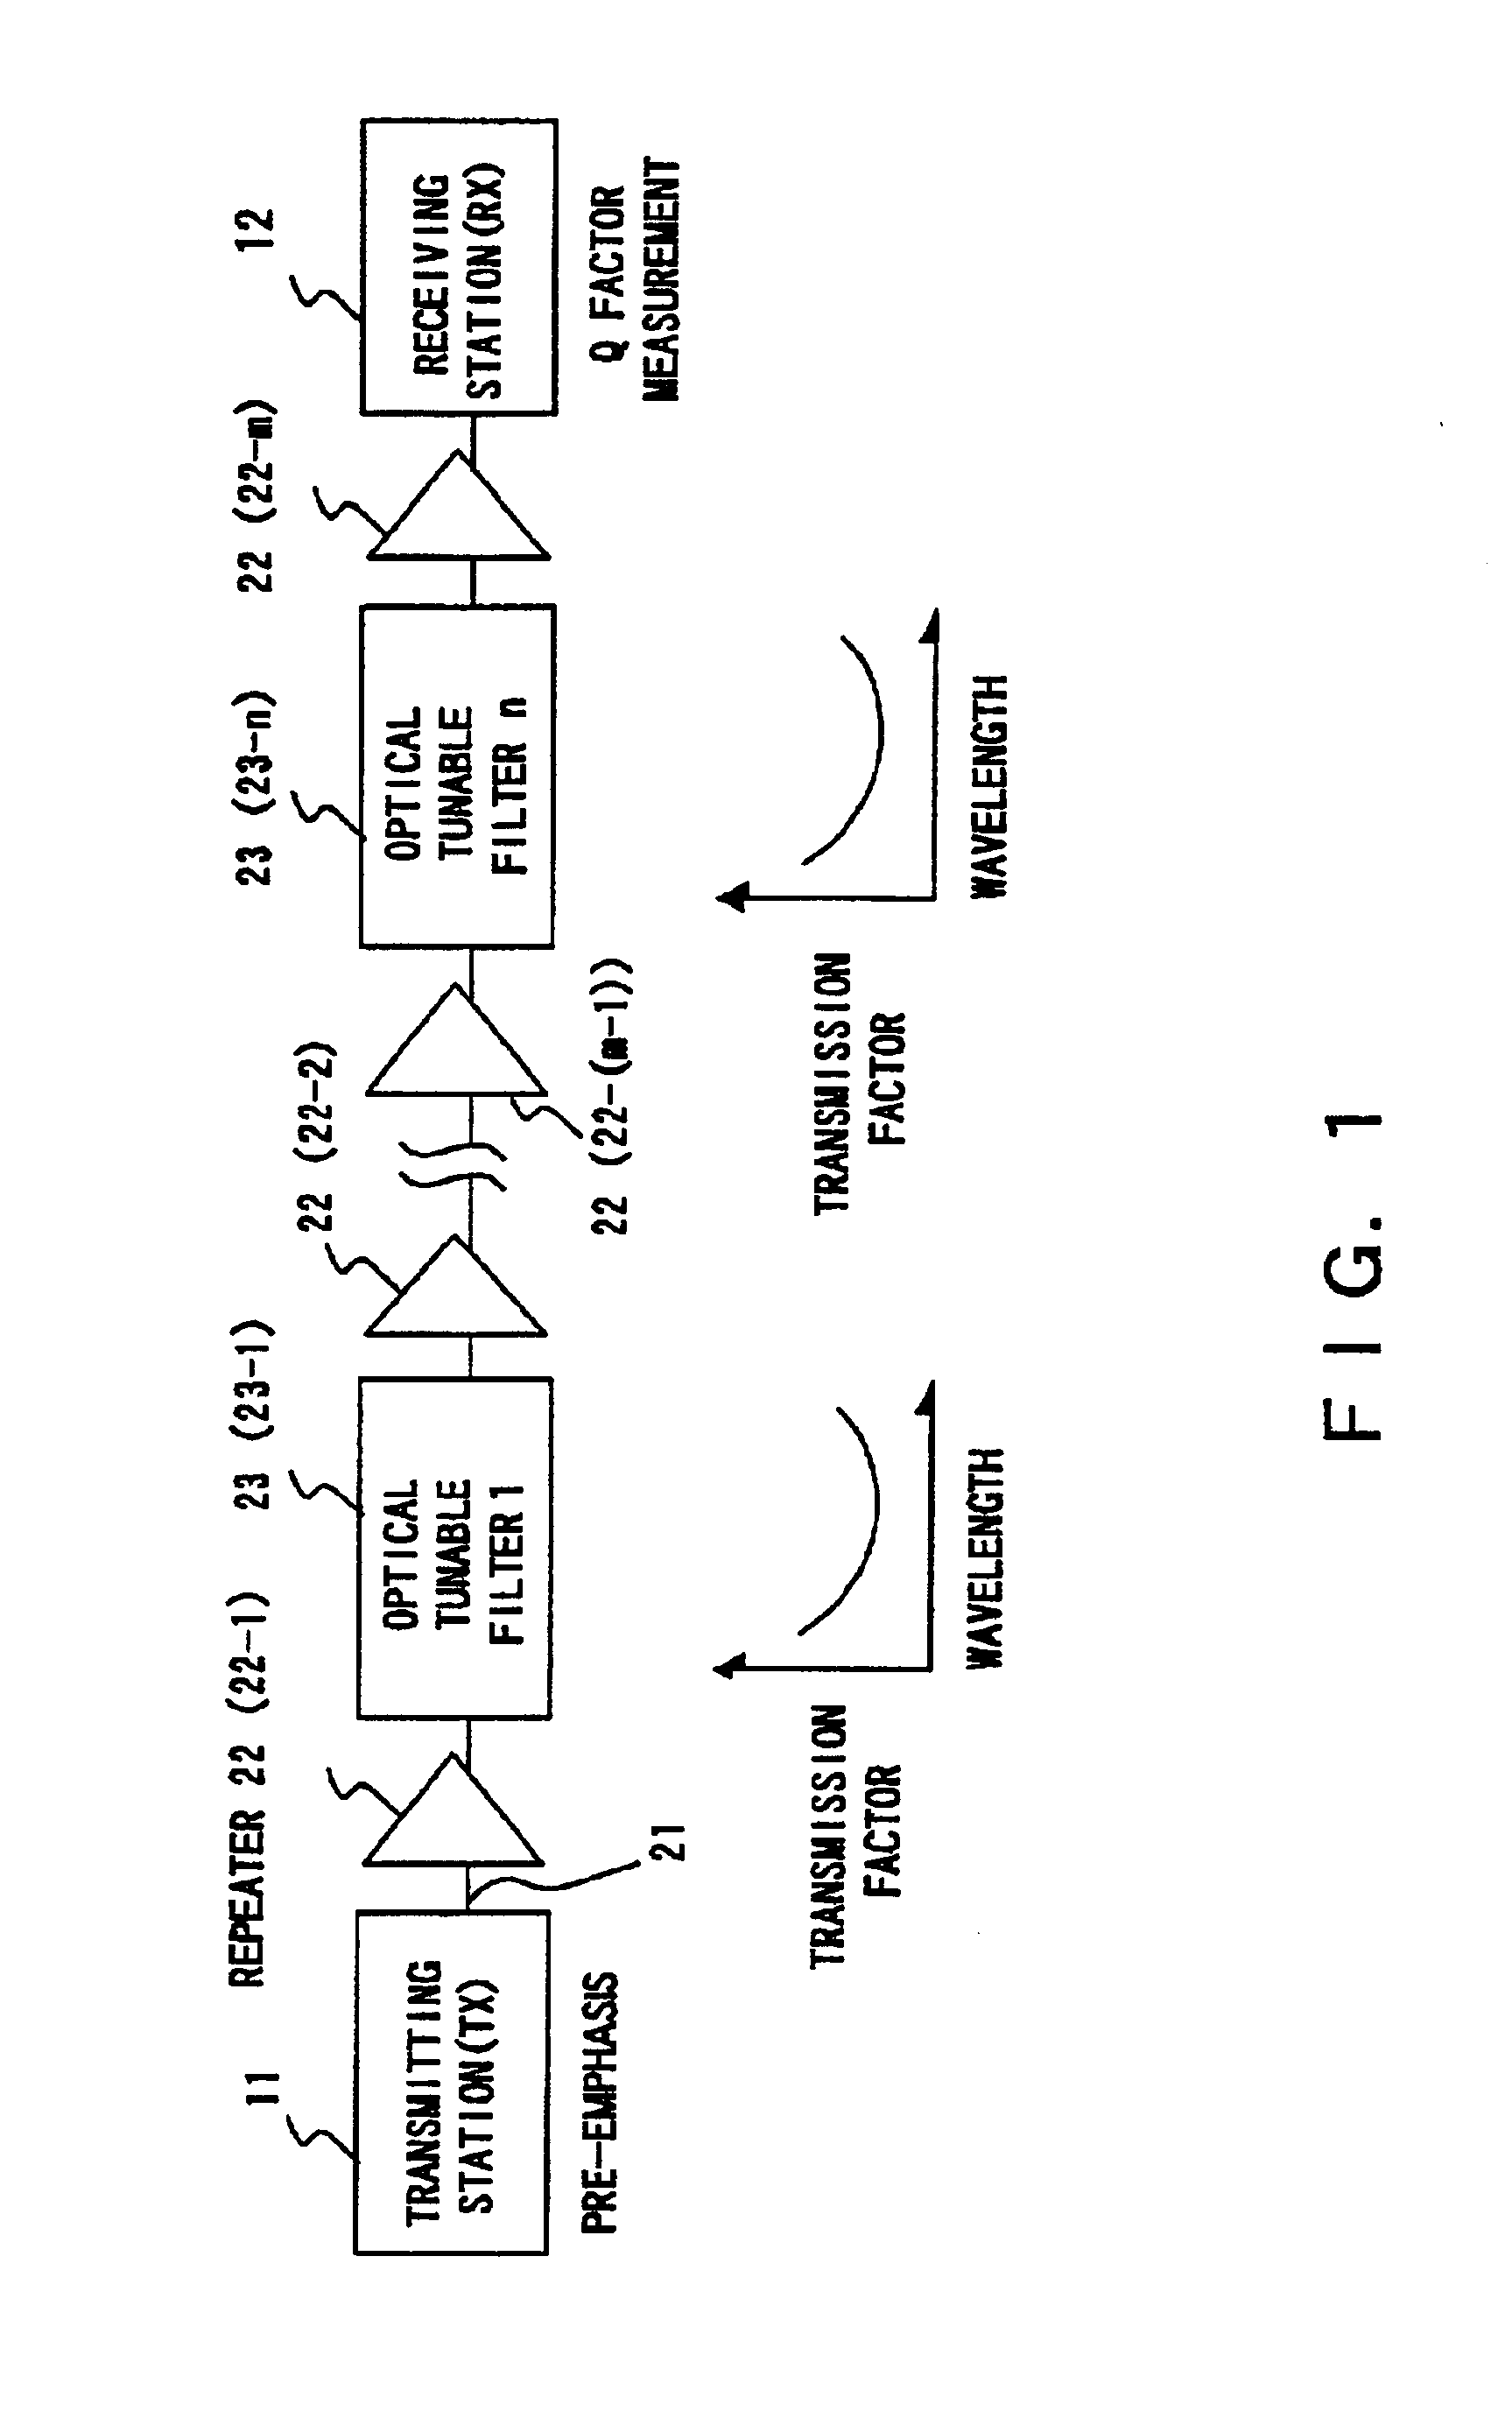 System and method for equalizing transmission characteristics in wavelength division multiplexing optical communication system